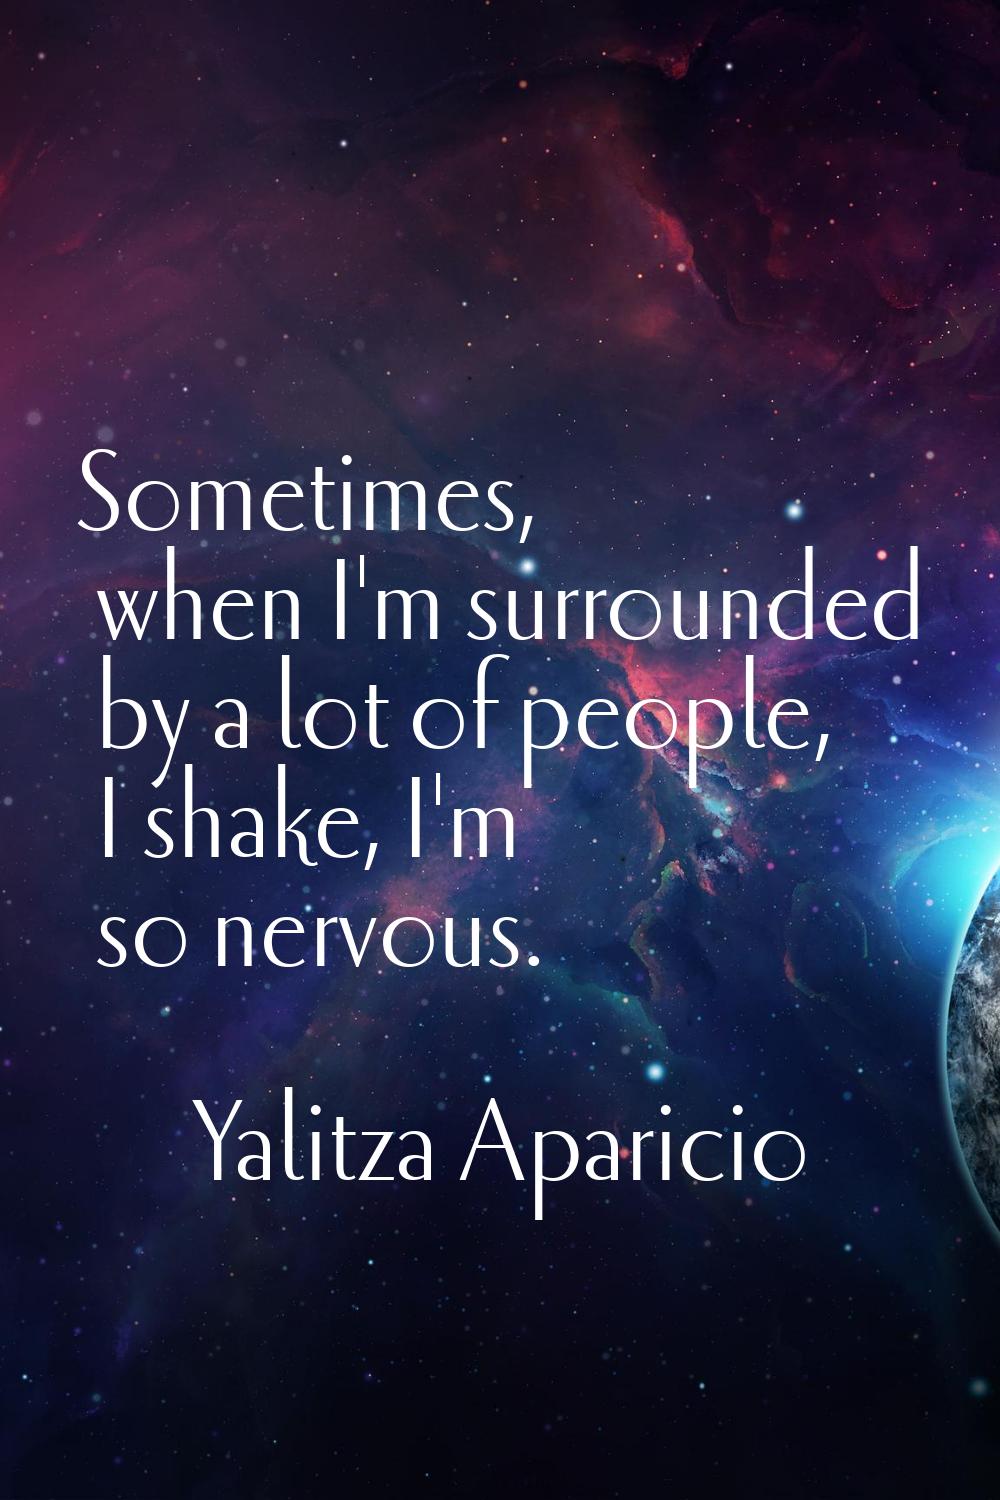 Sometimes, when I'm surrounded by a lot of people, I shake, I'm so nervous.